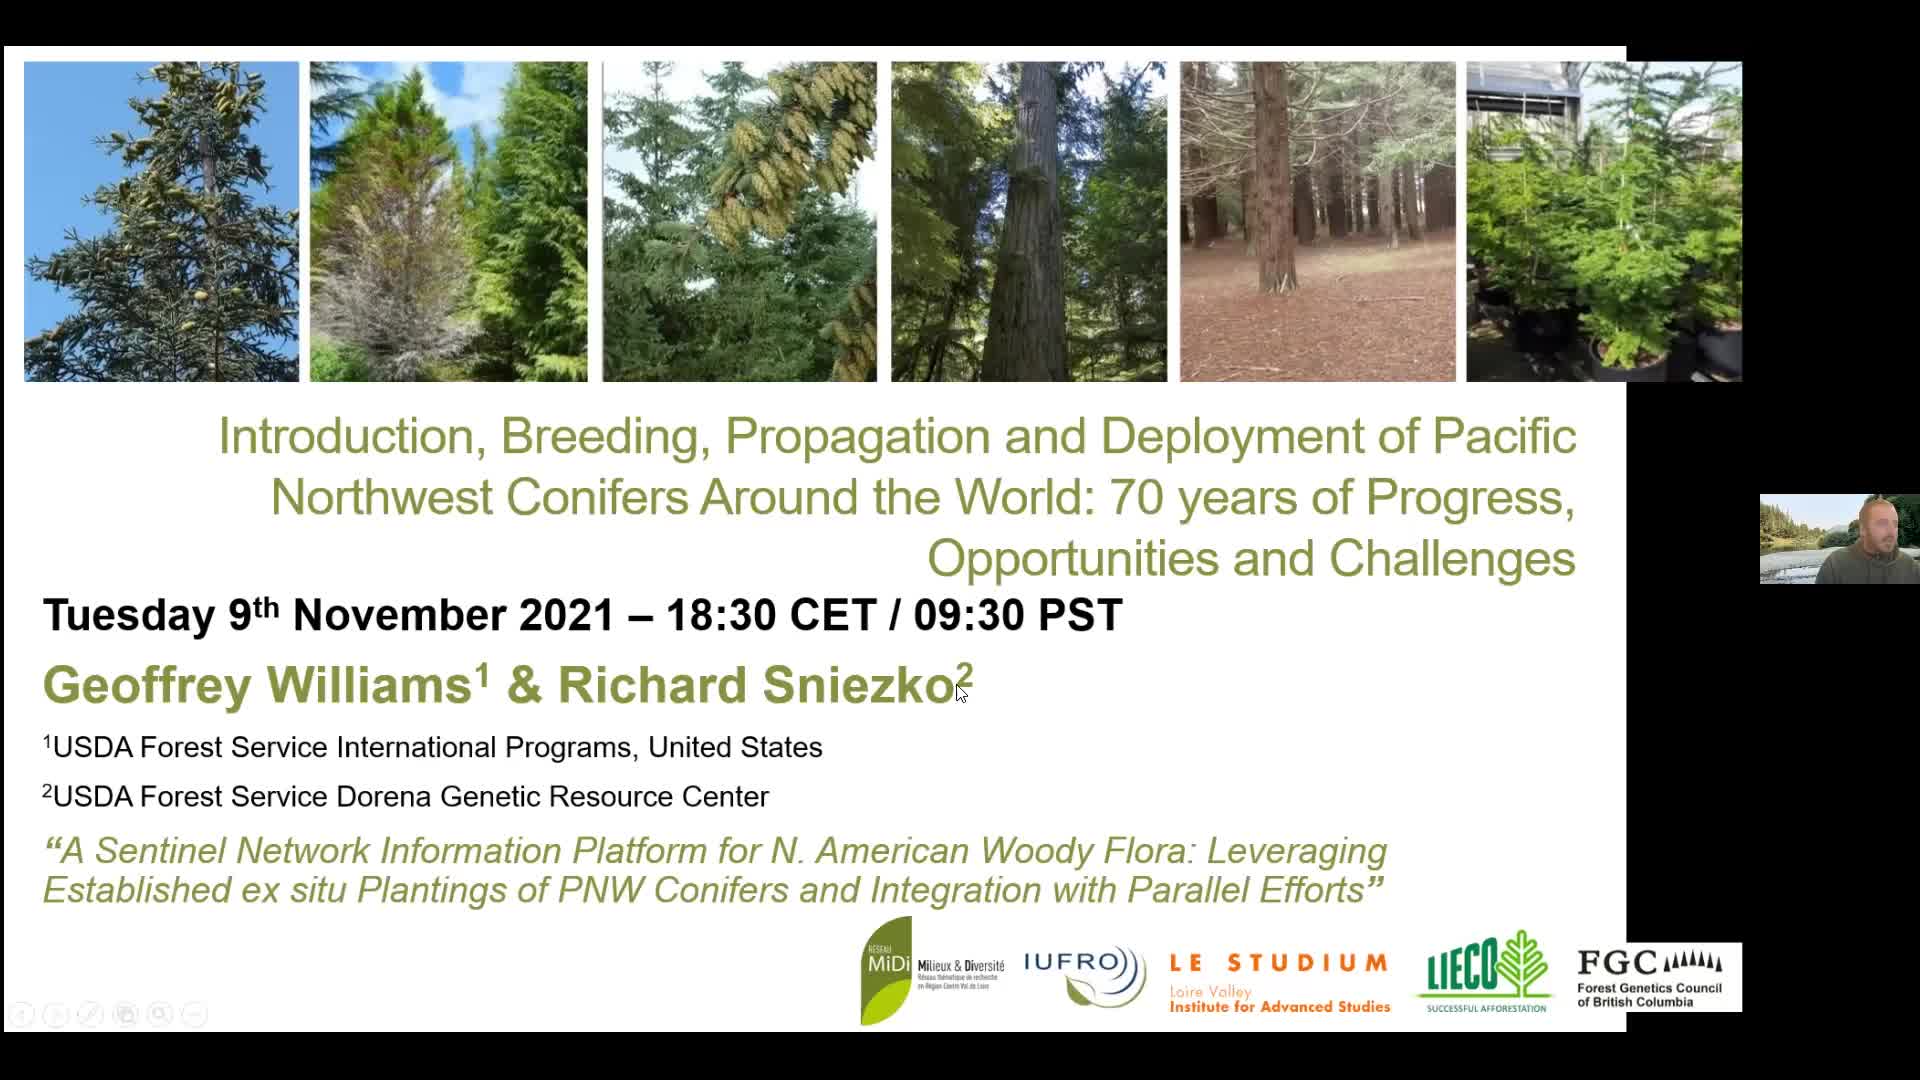 A Sentinel Network Information Platform for N. American Woody Flora: Leveraging Established ex situ Plantings of PNW Conifers and Integration with Parallel Efforts - Geoffrey Williams